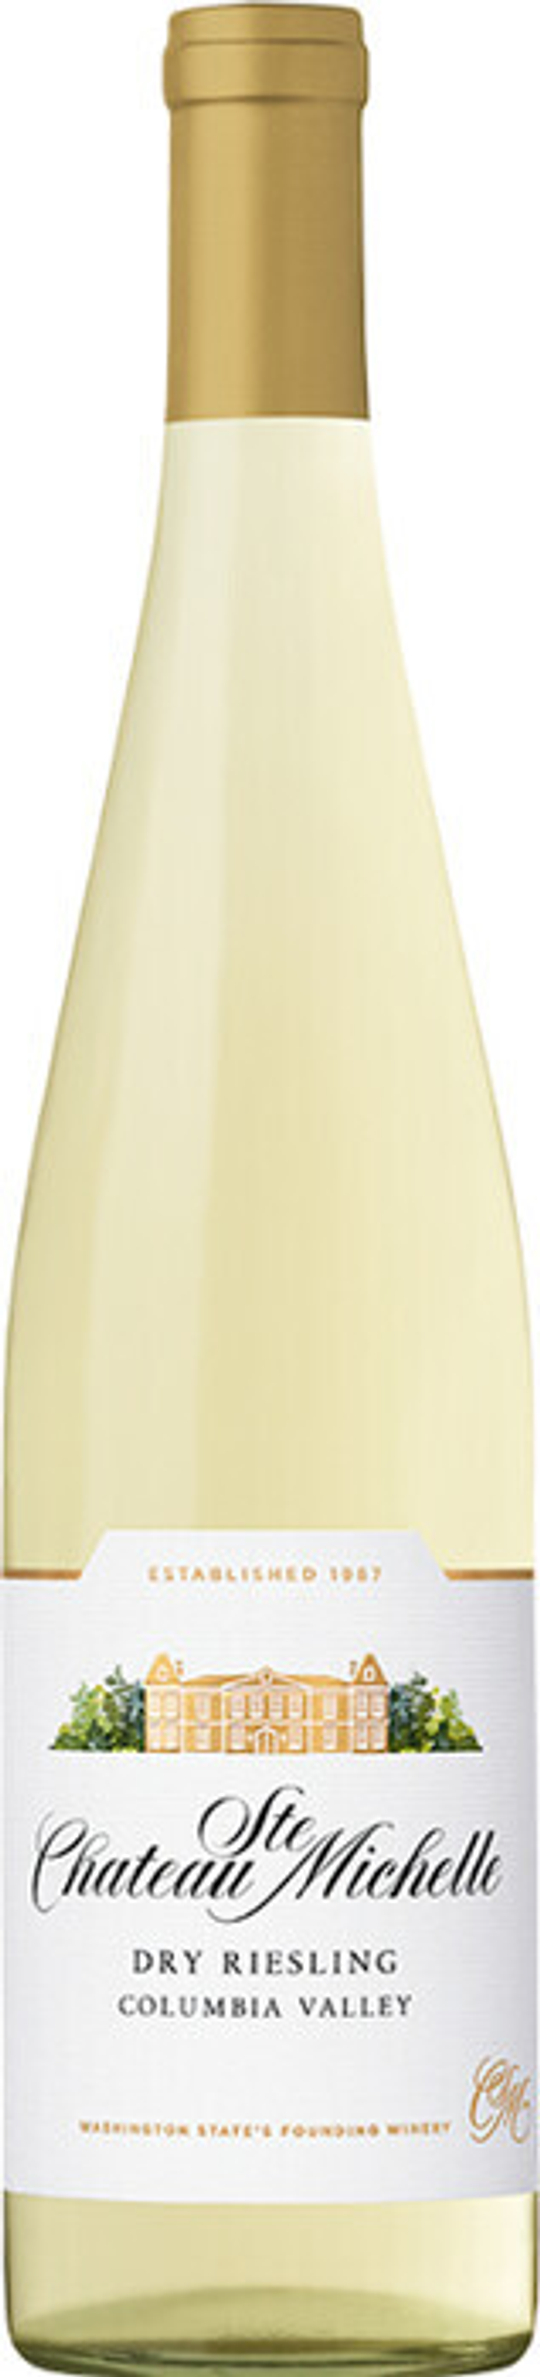 Вино Chateau Ste Michelle Dry Riesling Columbia Valley, 0,75 л.